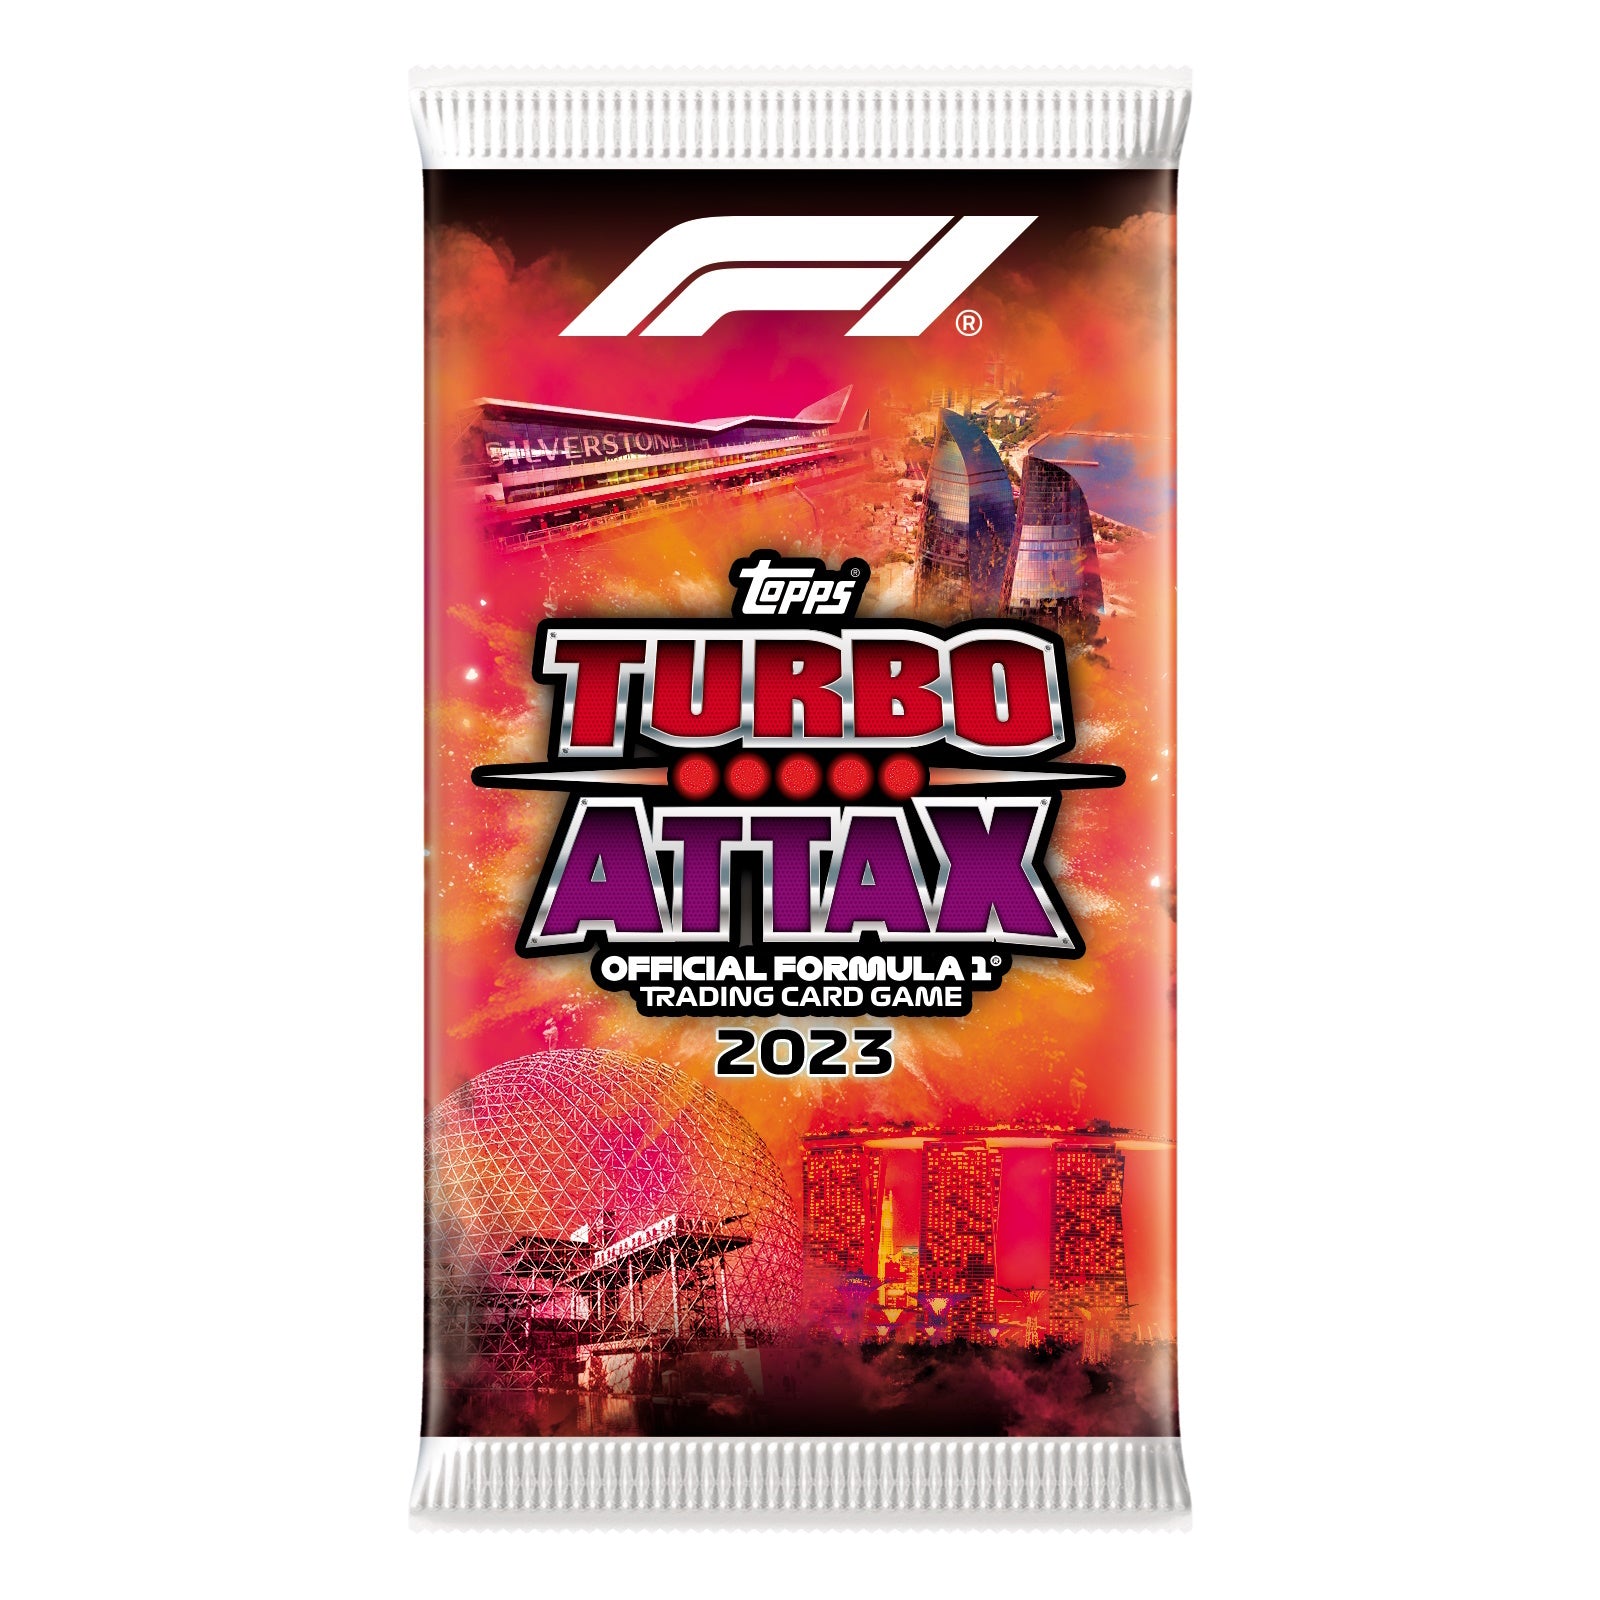 2023 TOPPS TURBO ATTAX FORMULA 1 CARDS - 24-PACK BOX (240 CARDS)